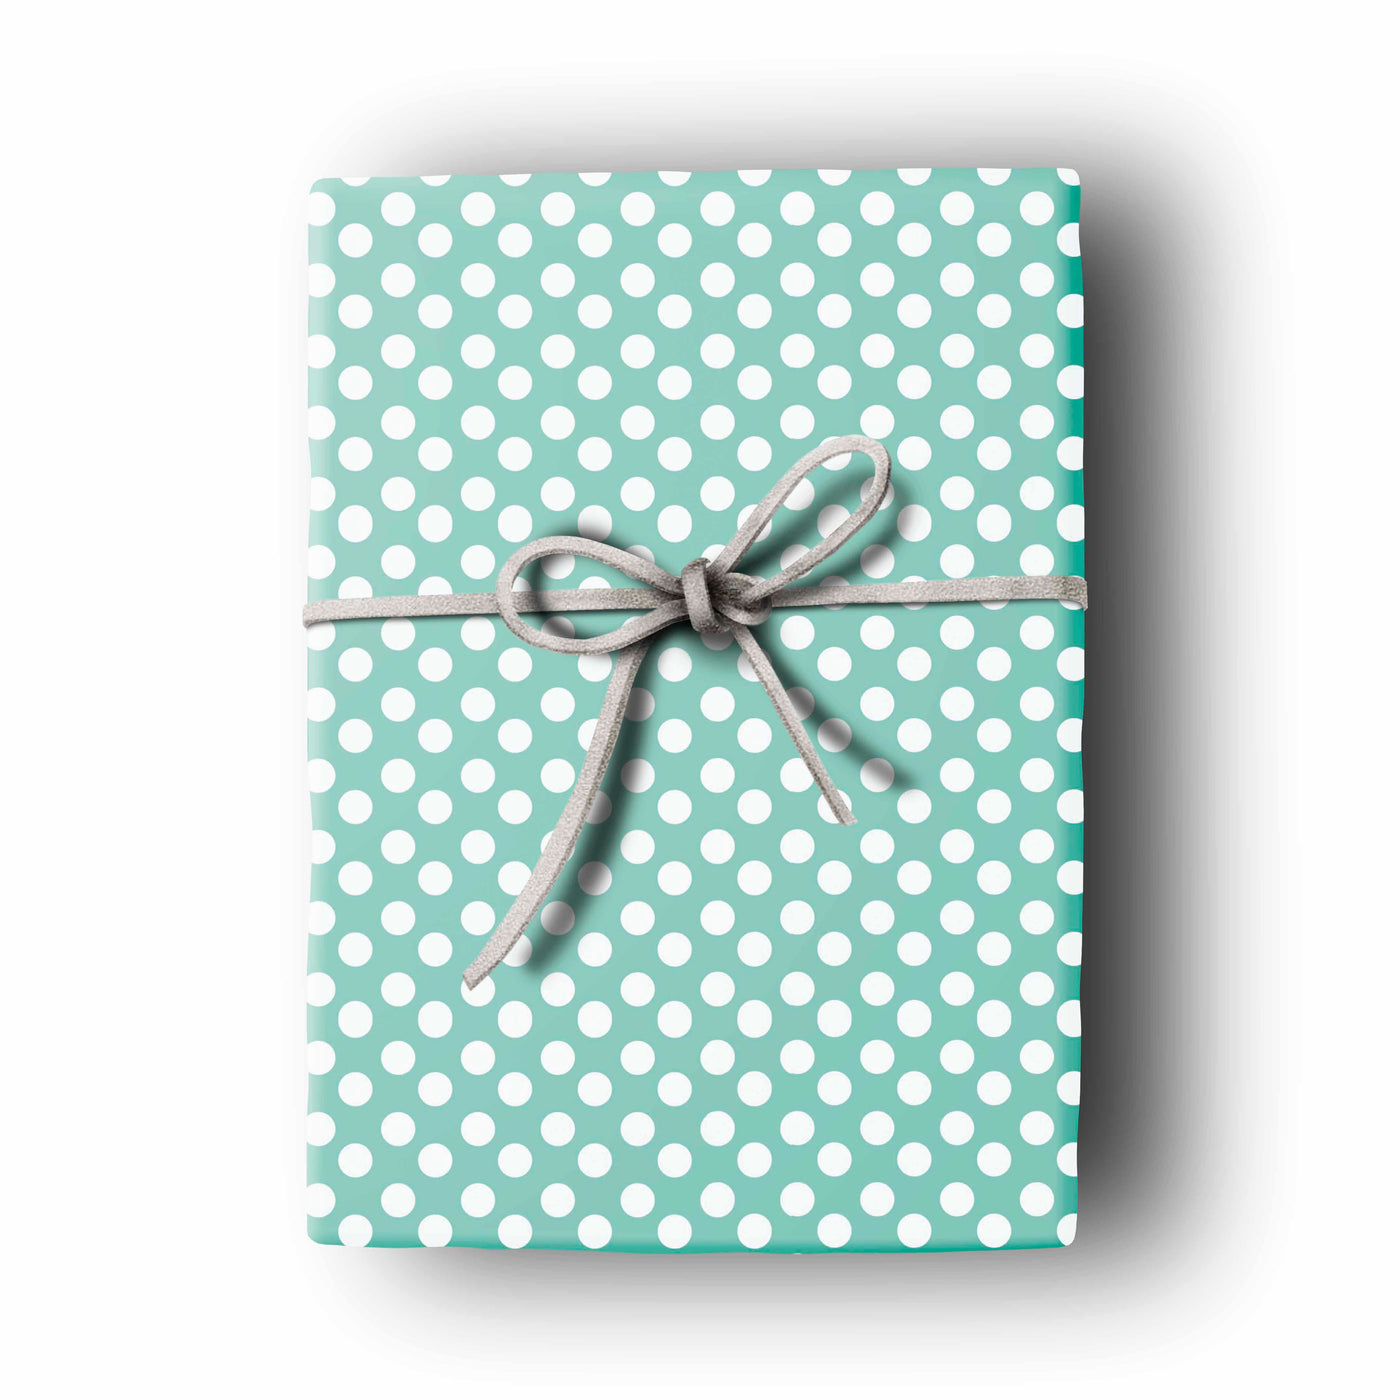 Choose from a variety of Bridal Shower wrapping paper designs or